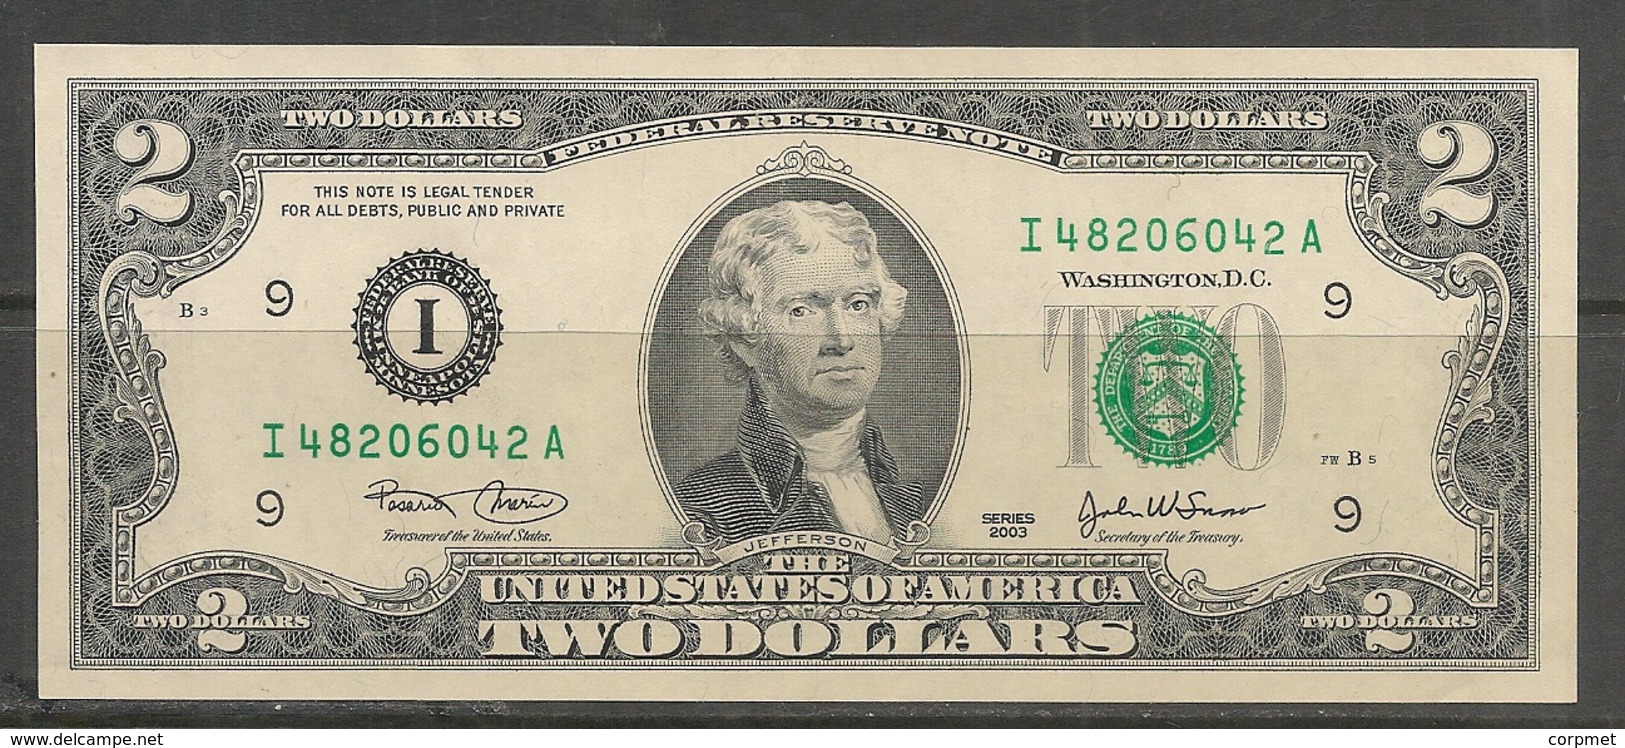 US - 2 DOLLARS - ISSUED In NEW YORK - Letter B - Federal Reserve Notes (1928-...)